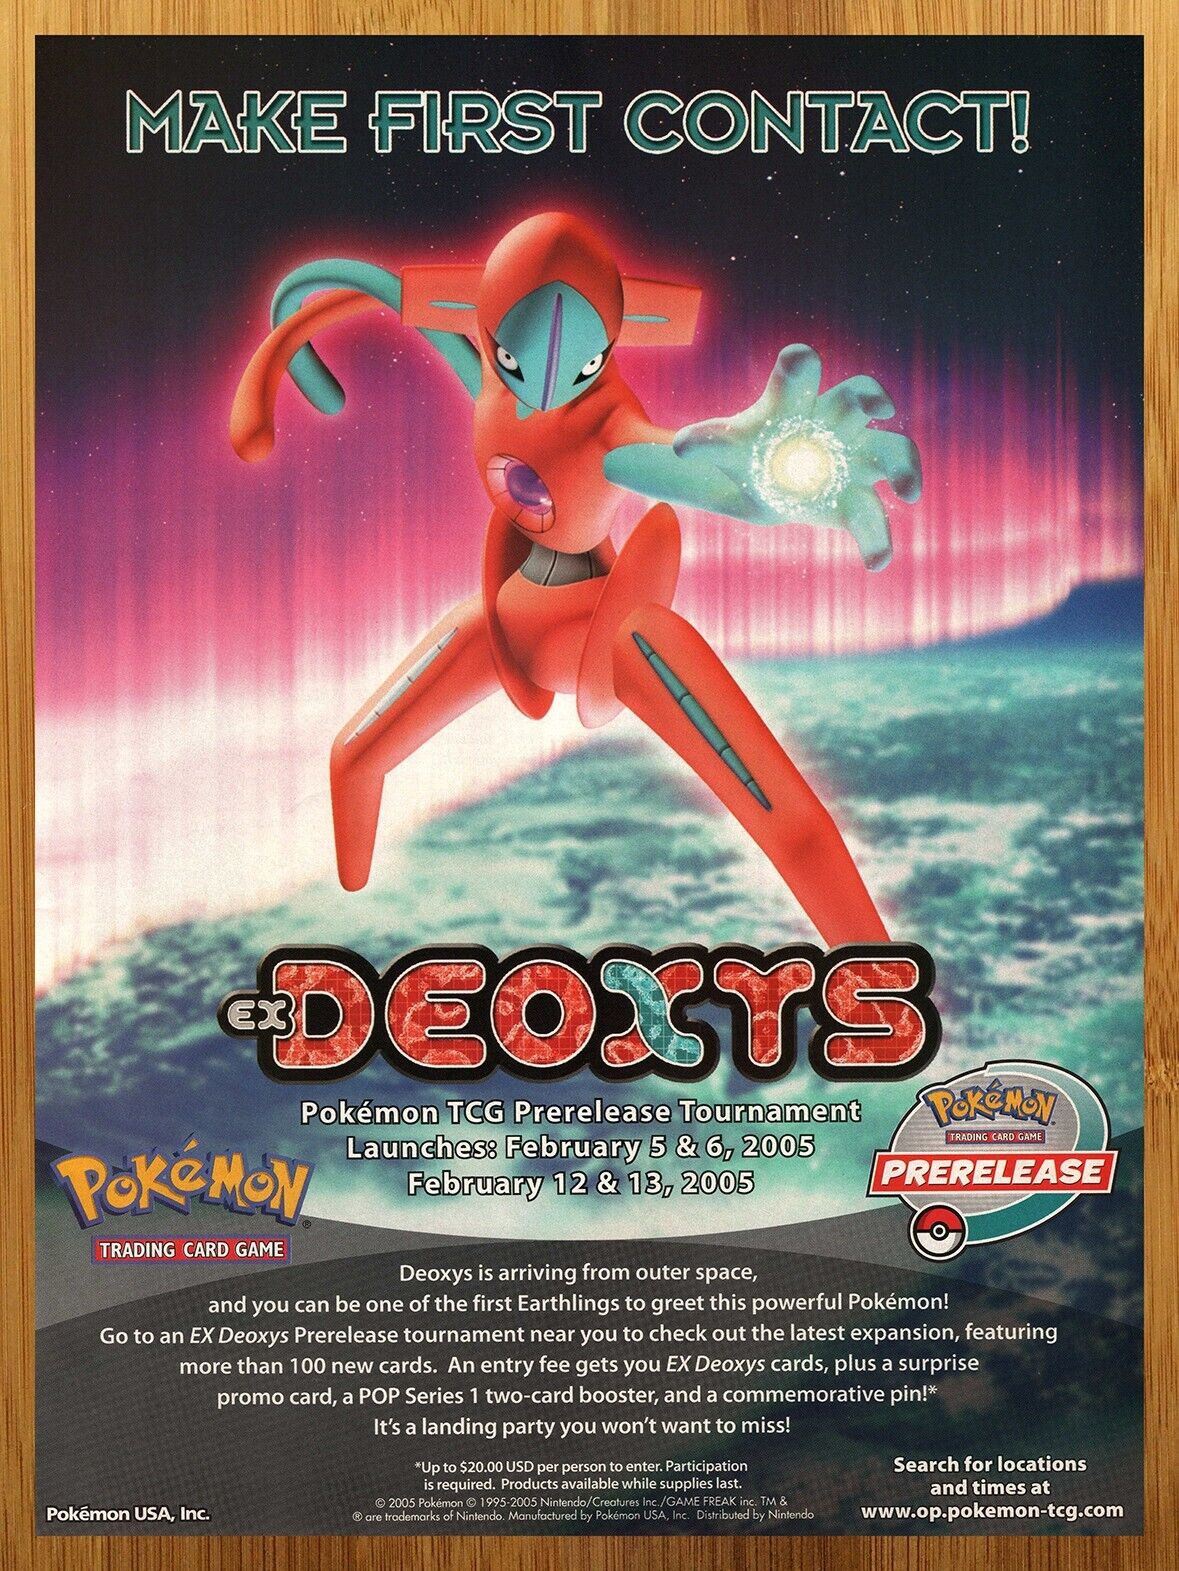 2005 Pokemon TCG EX Deoxys Print Ad/Poster Official CCG Card Game Promo Art 00s